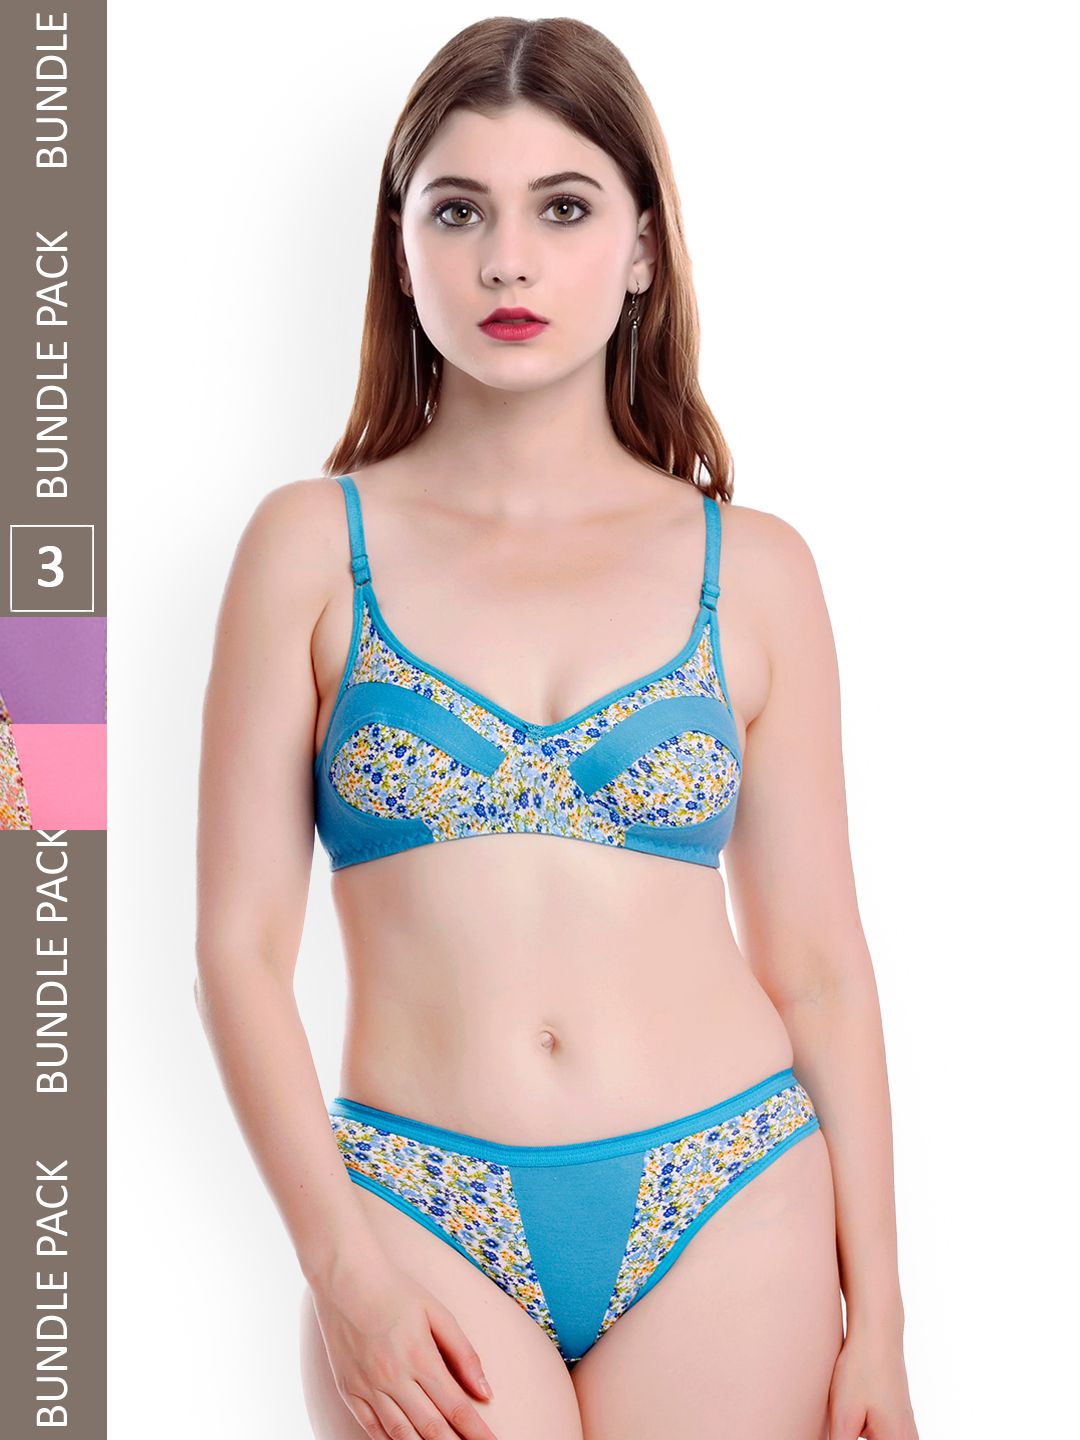 Buy Arousy AROUSY Laced Lingerie Set at Redfynd